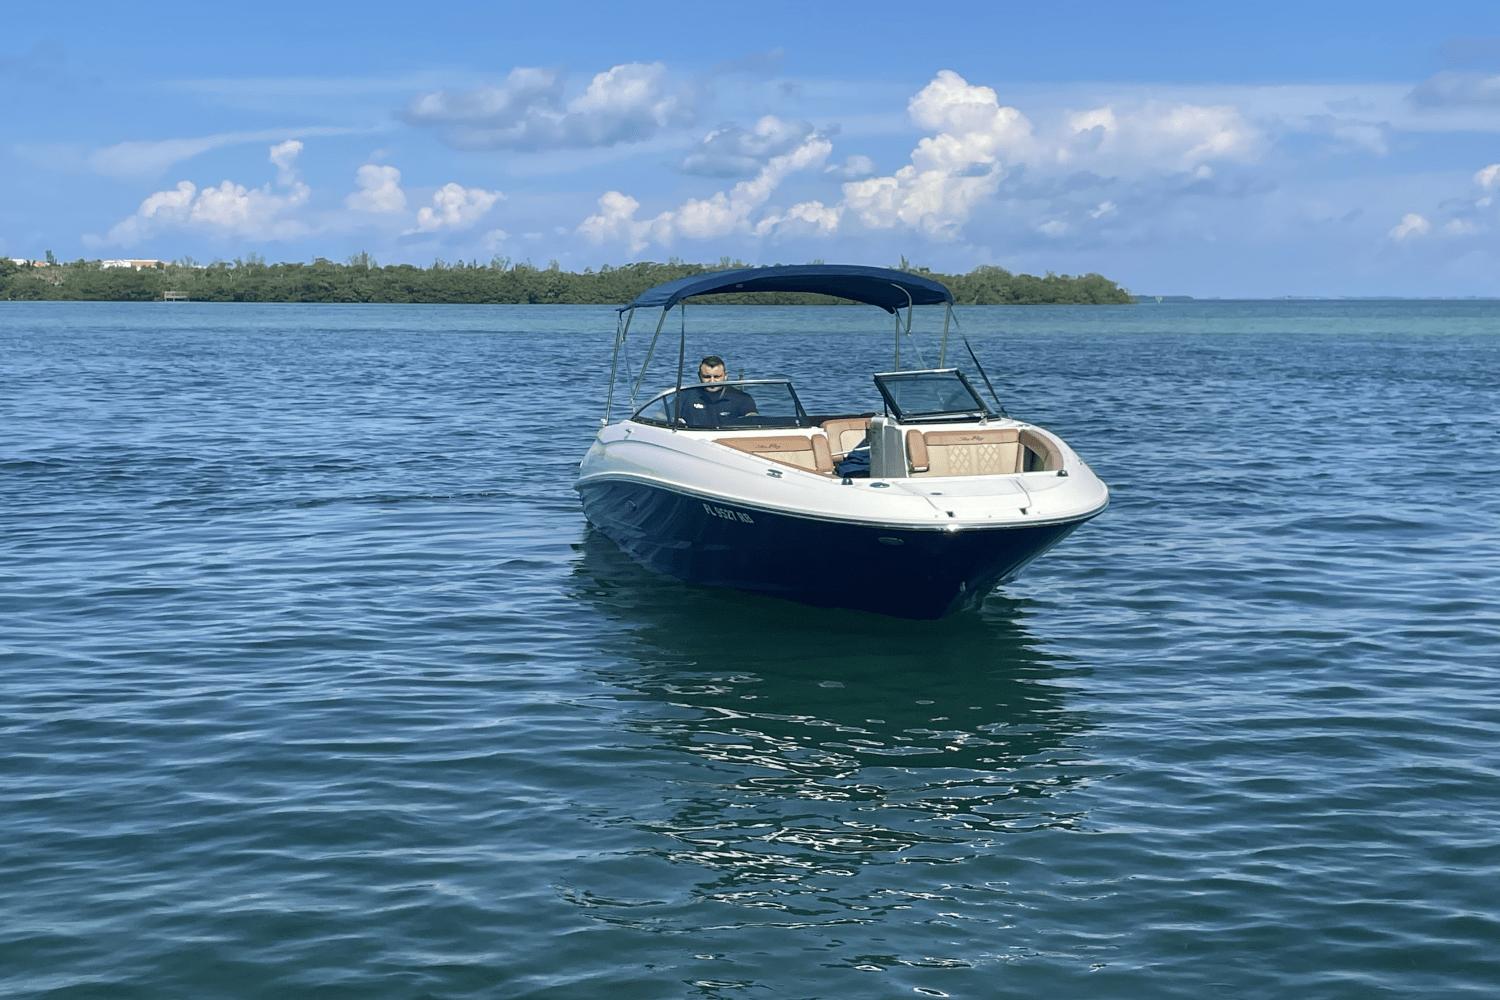 2015 Sea Ray 240 Sundeck Outboard Runabout for sale - YachtWorld